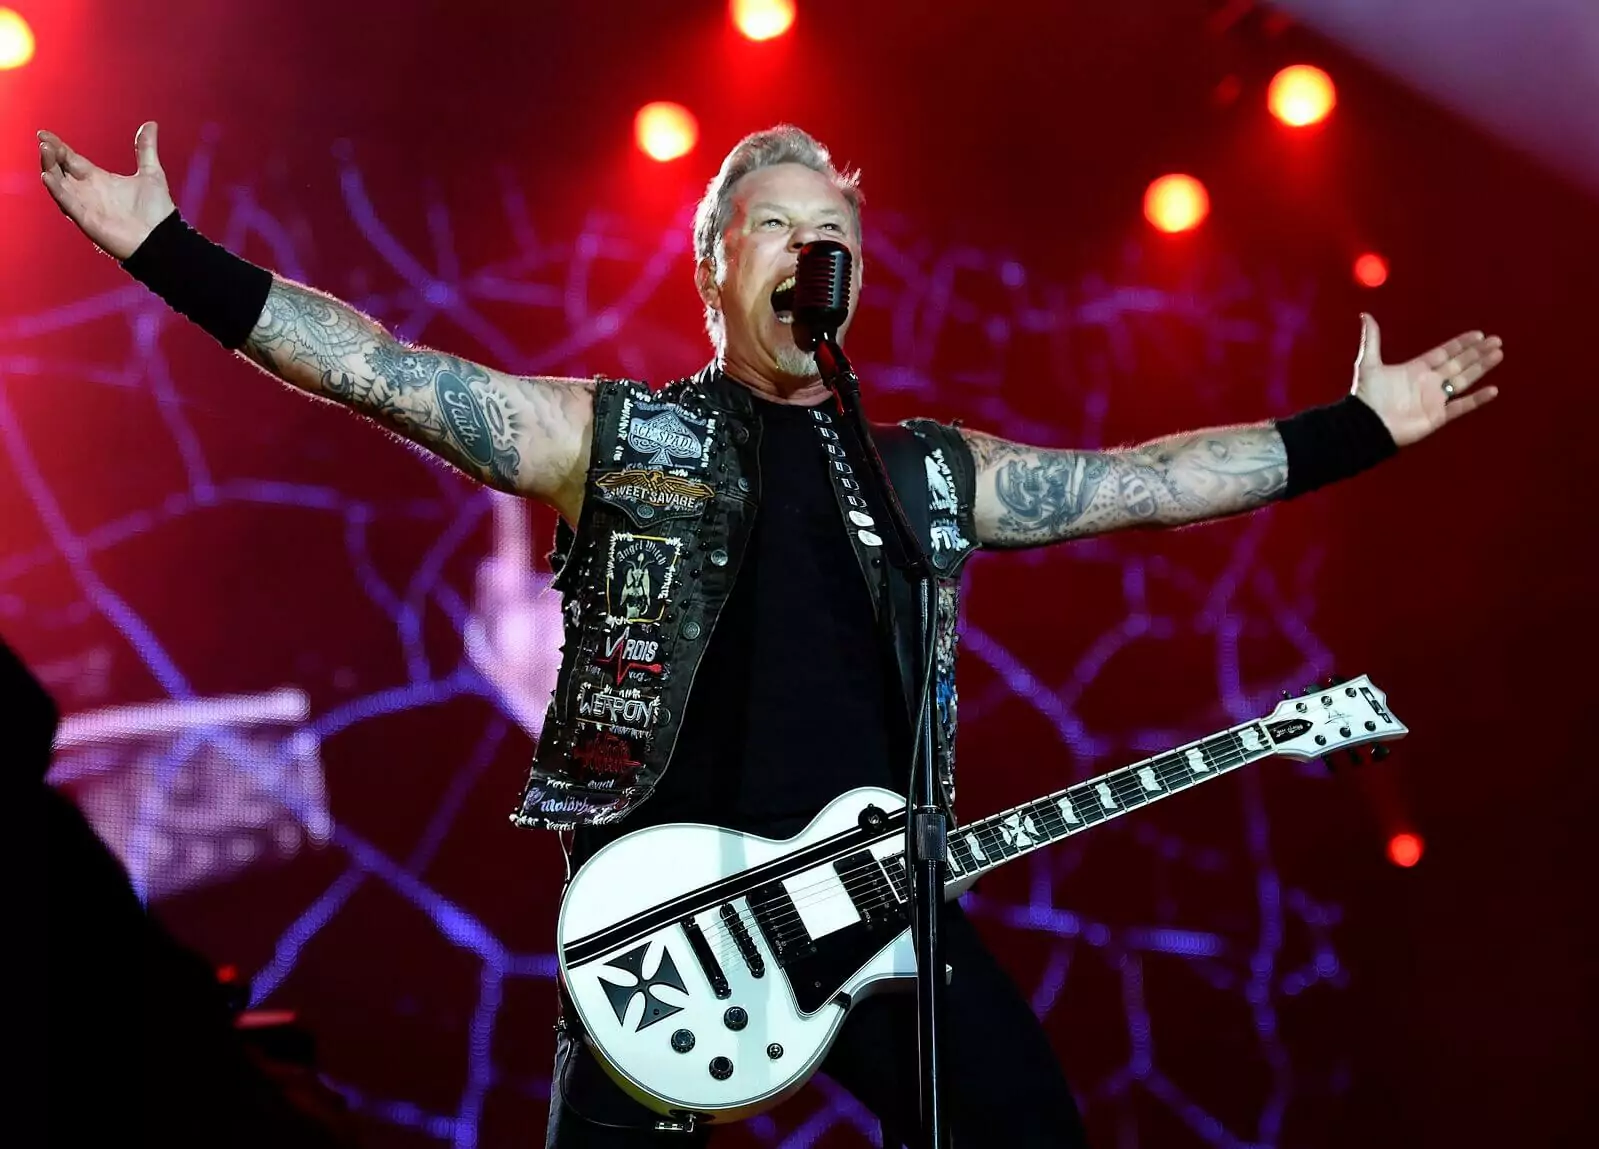 Metallica's James Hetfield Interview: "More difficult than others"